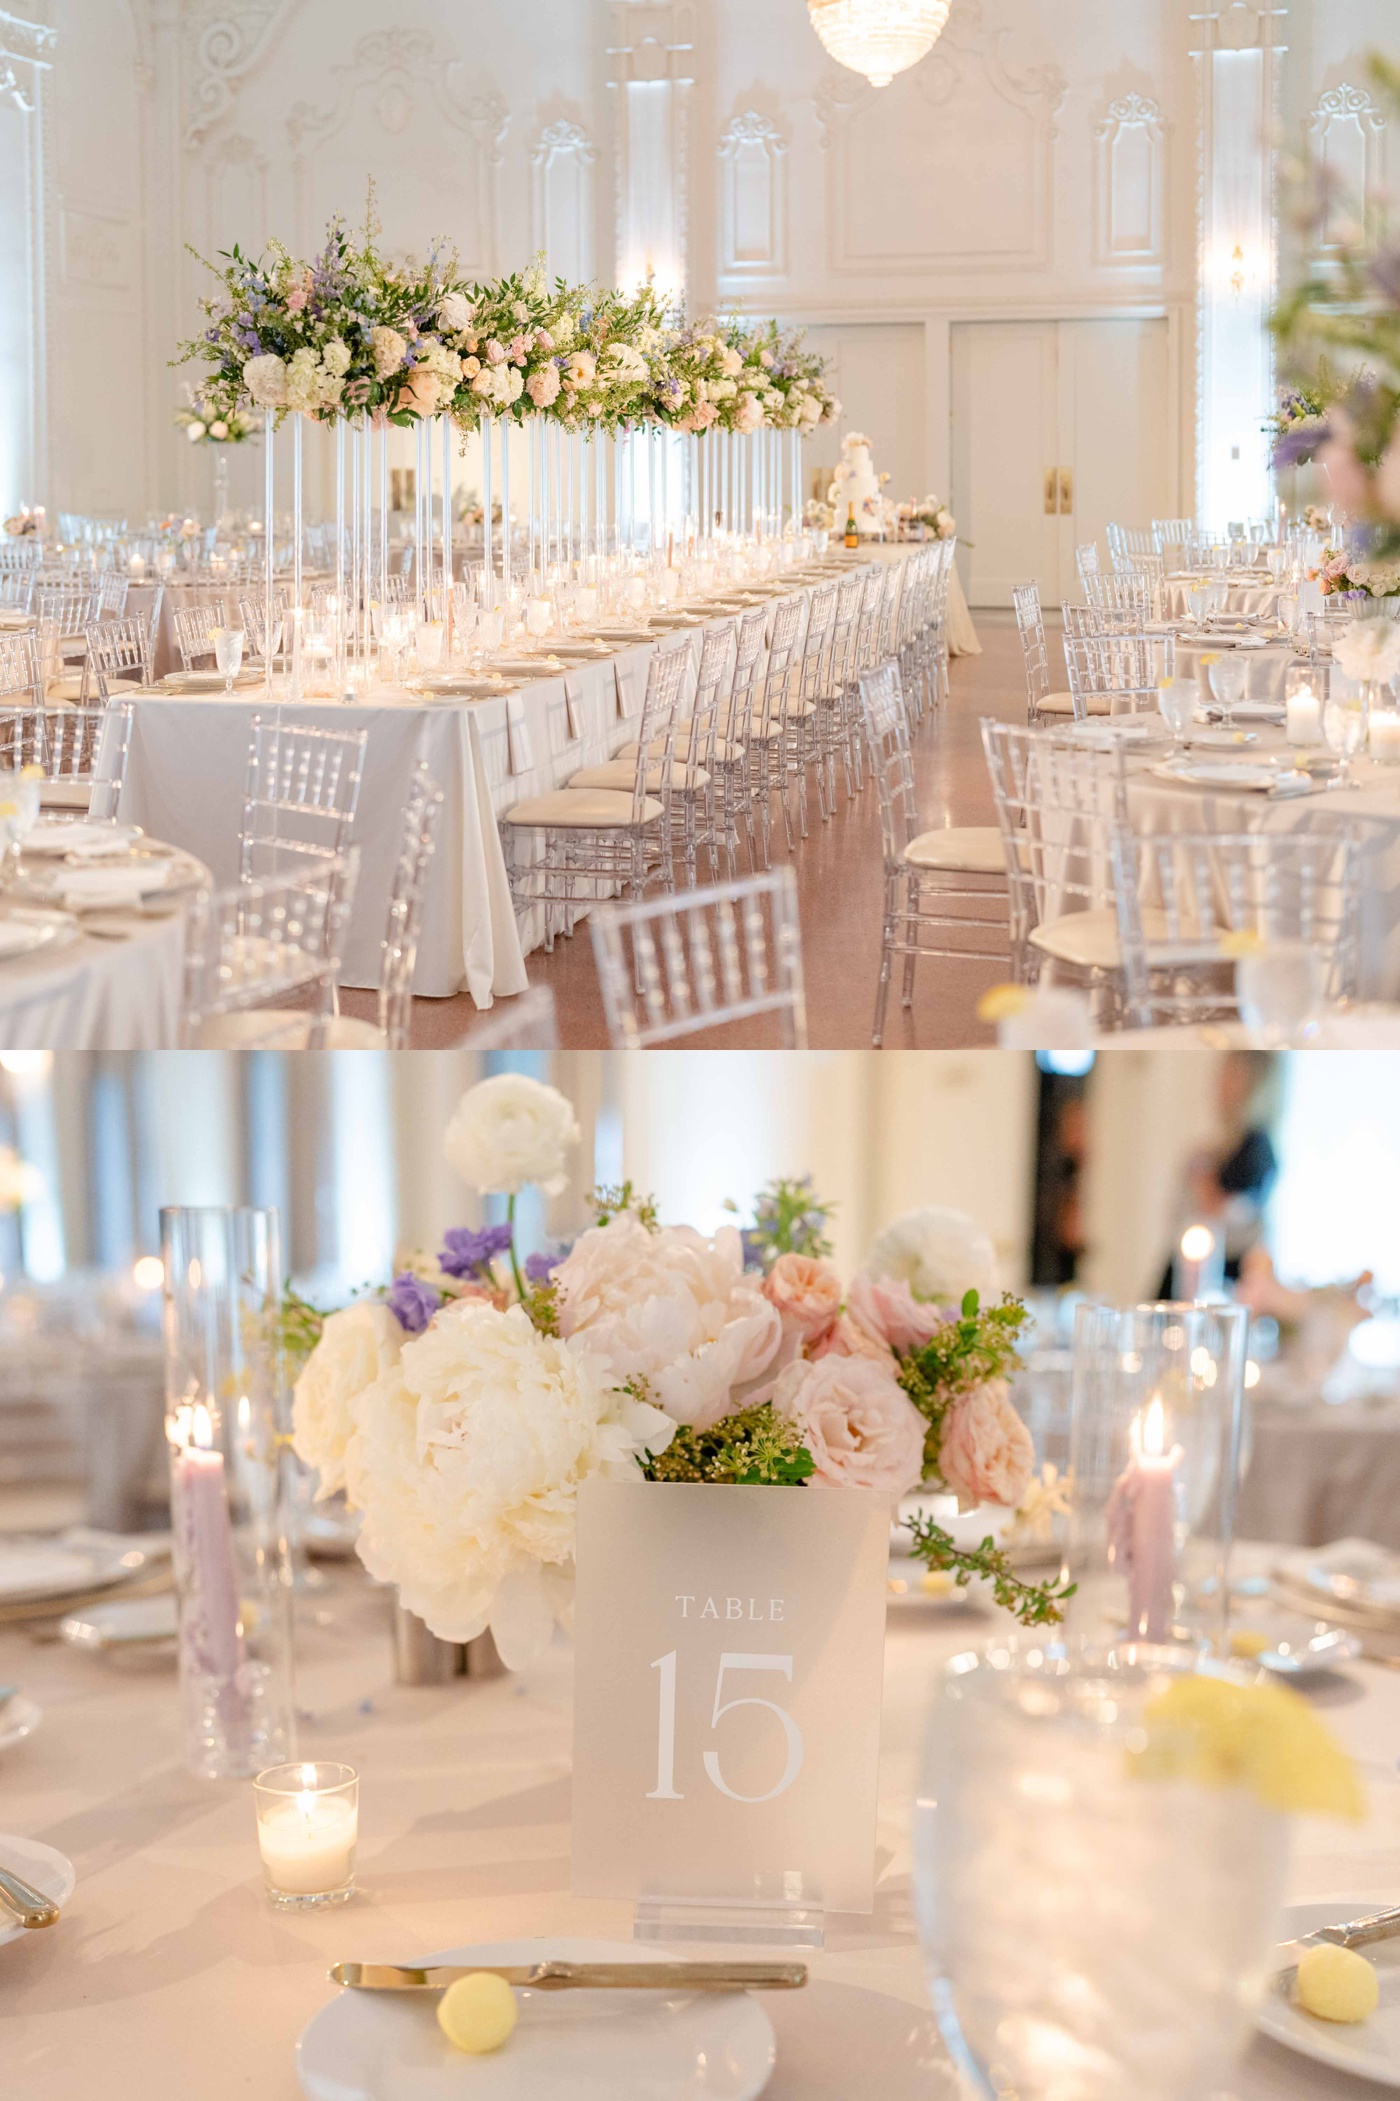 Elevated wedding floral arrangements filled with white hydrangeas and blue delphinium